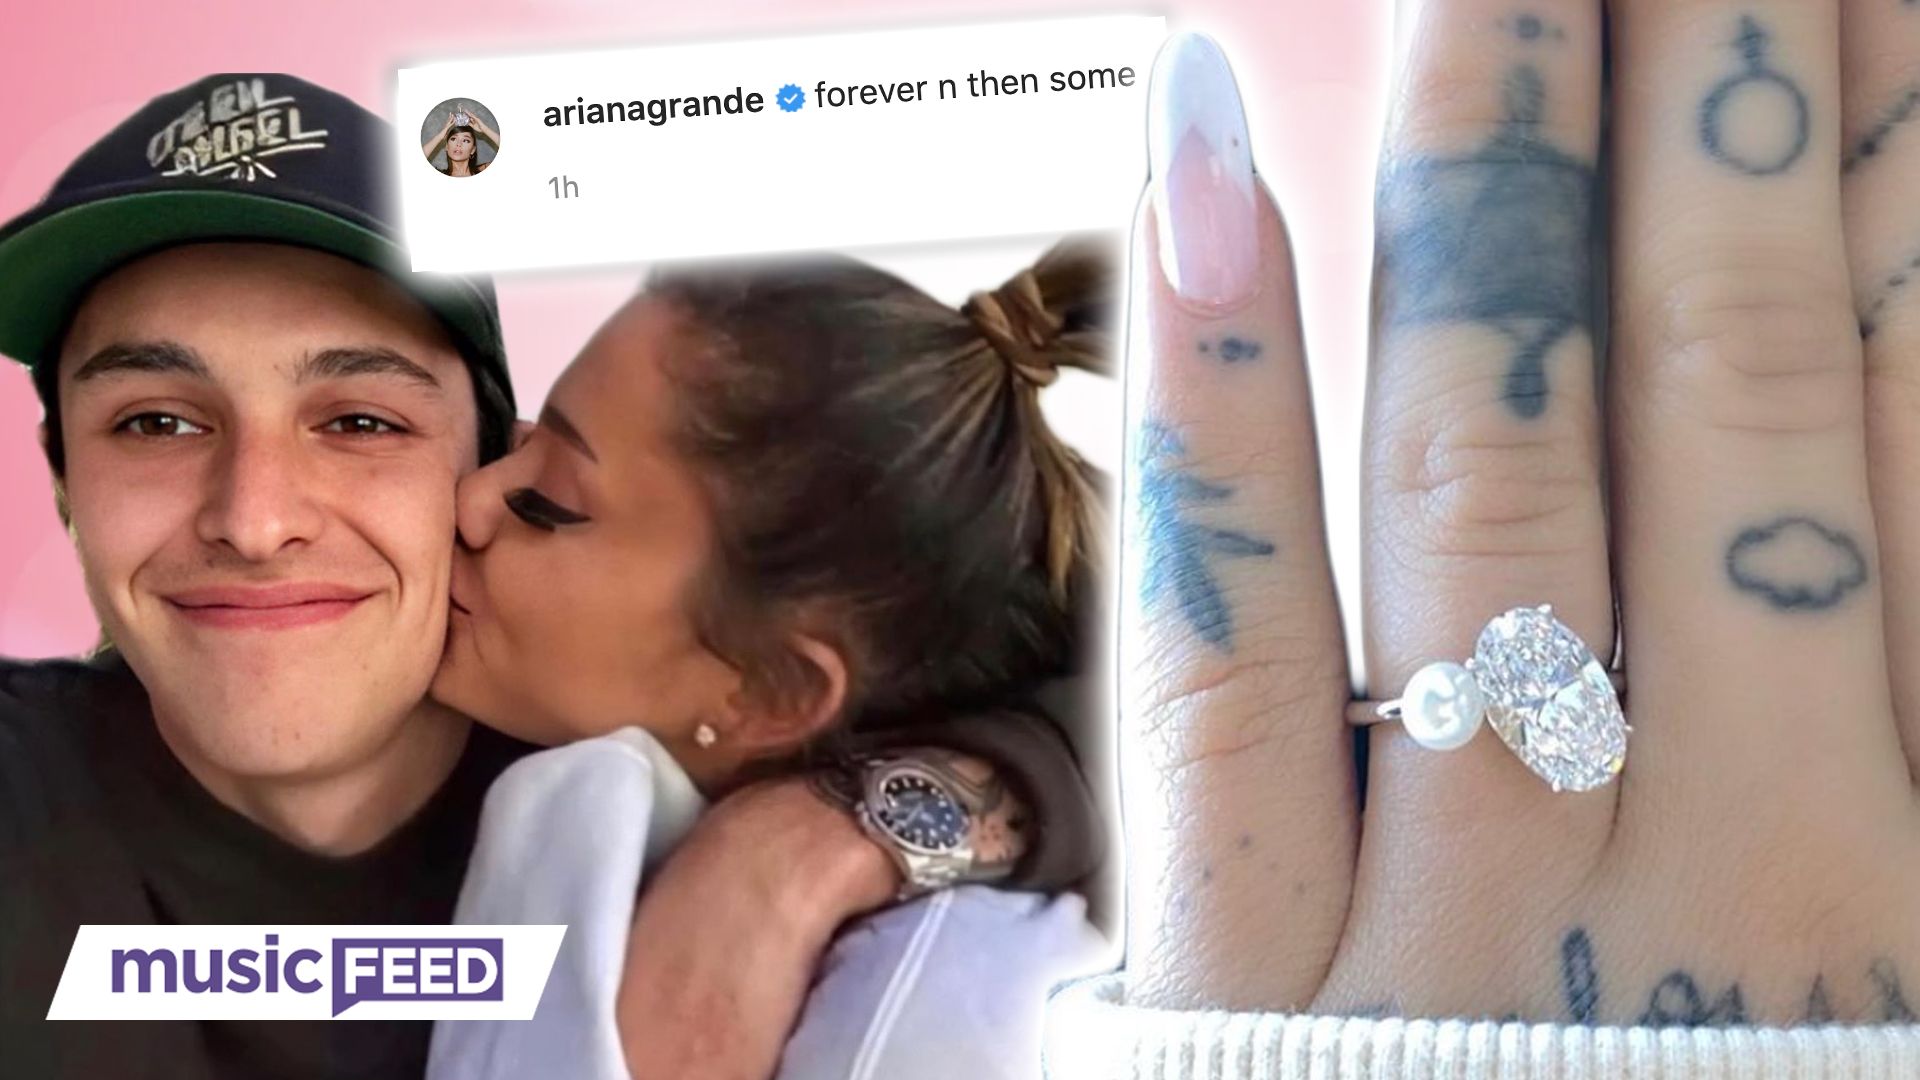 Dalton Gomez Was Very Involved in Designing Ariana Grande's Engagement Ring